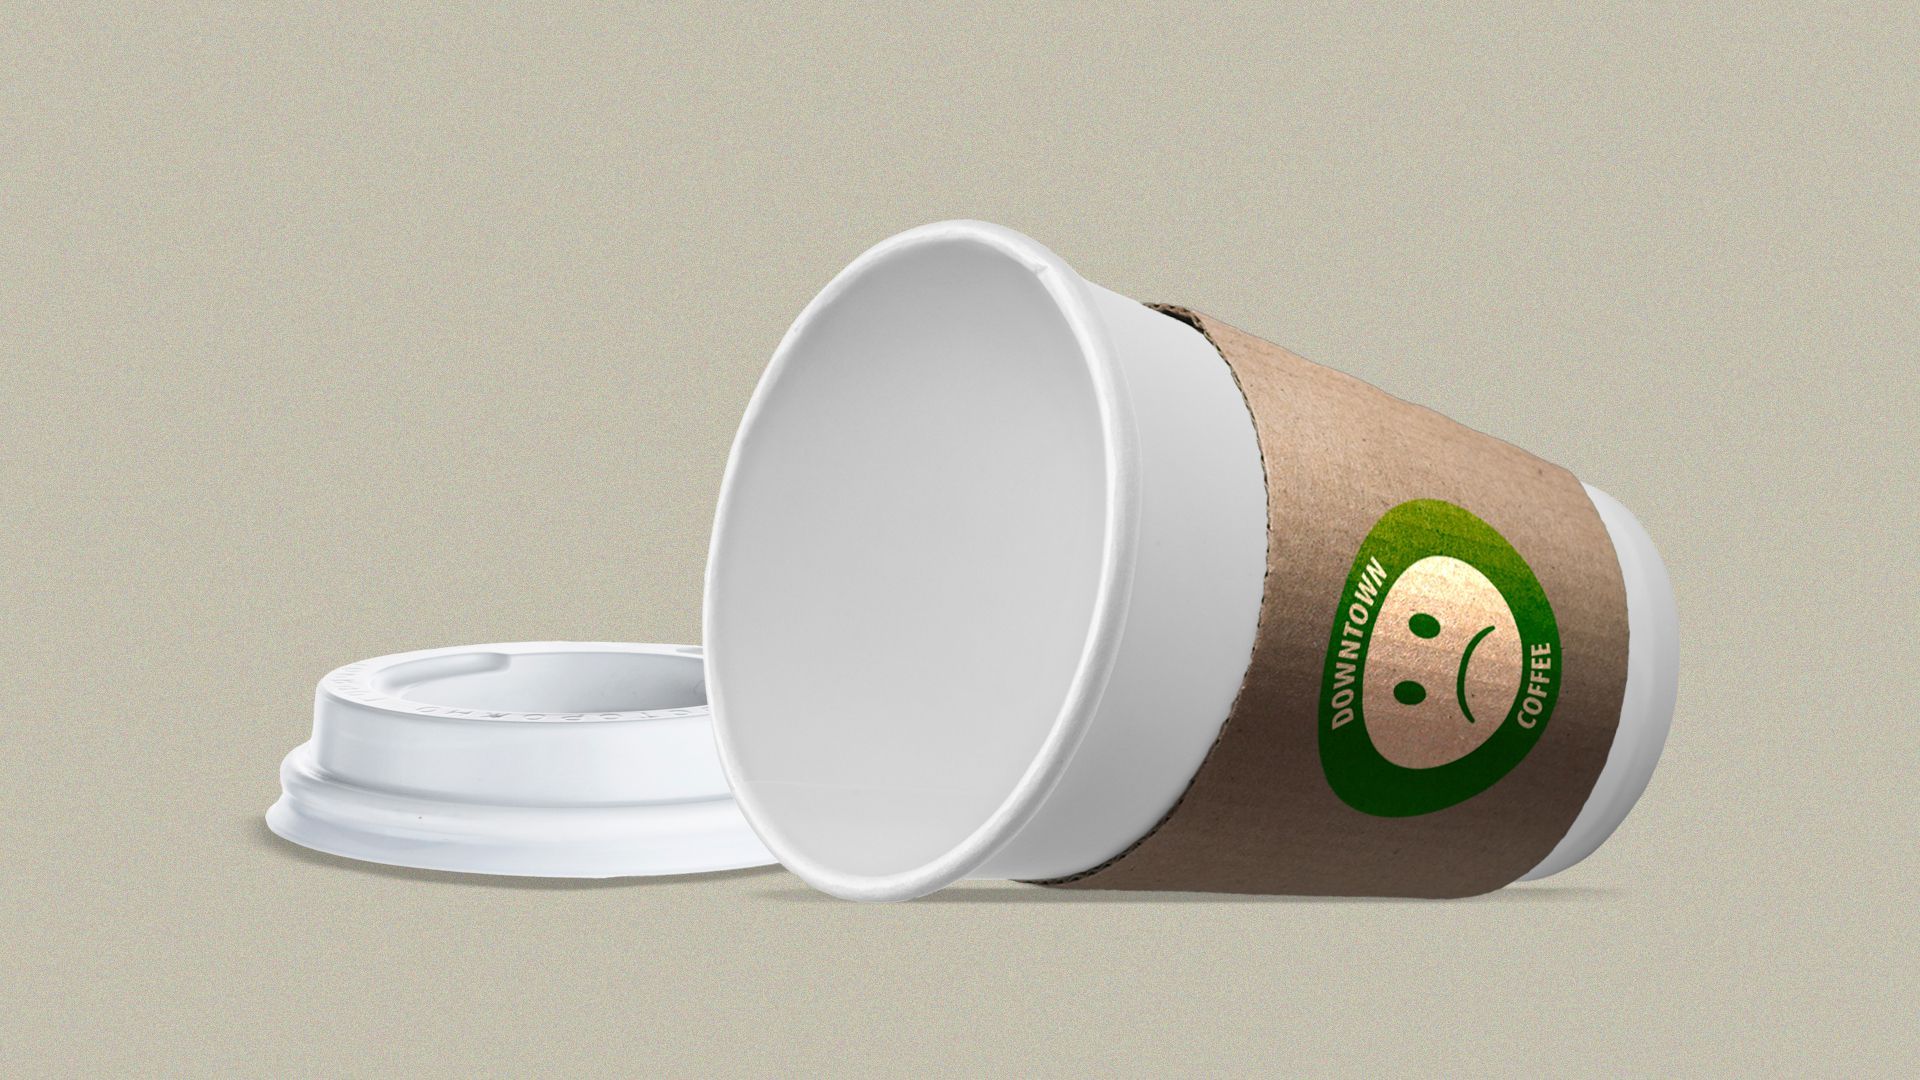 Illustration of an overturned, empty coffee cup, with a sad face and the words "Downtown Coffee" on it.